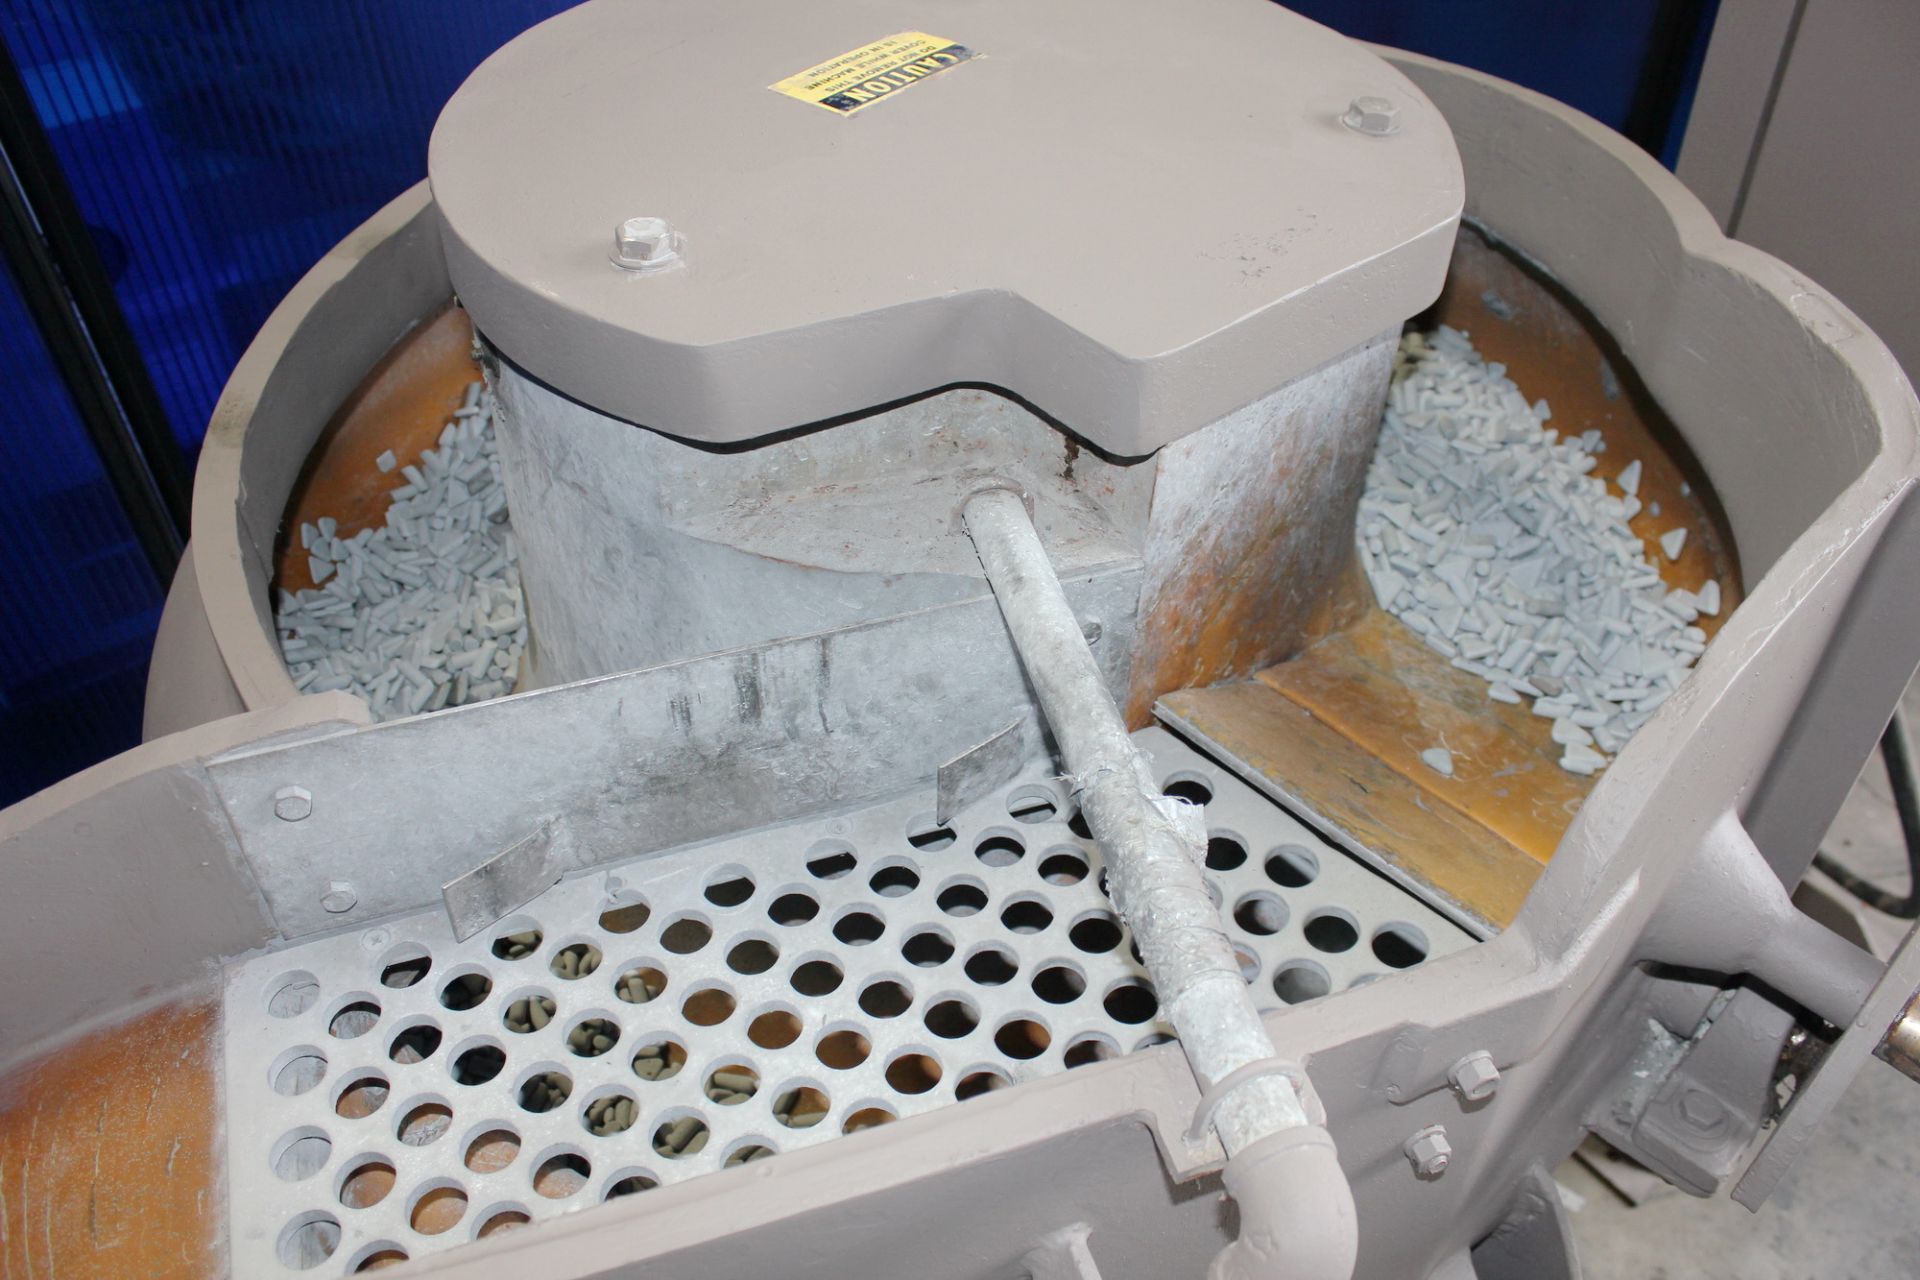 Gyromatic - Vibratory Deburring Machine (Bowl Type) | 4.5 Cubic Feet, Located In Huntington Park, CA - Image 6 of 13